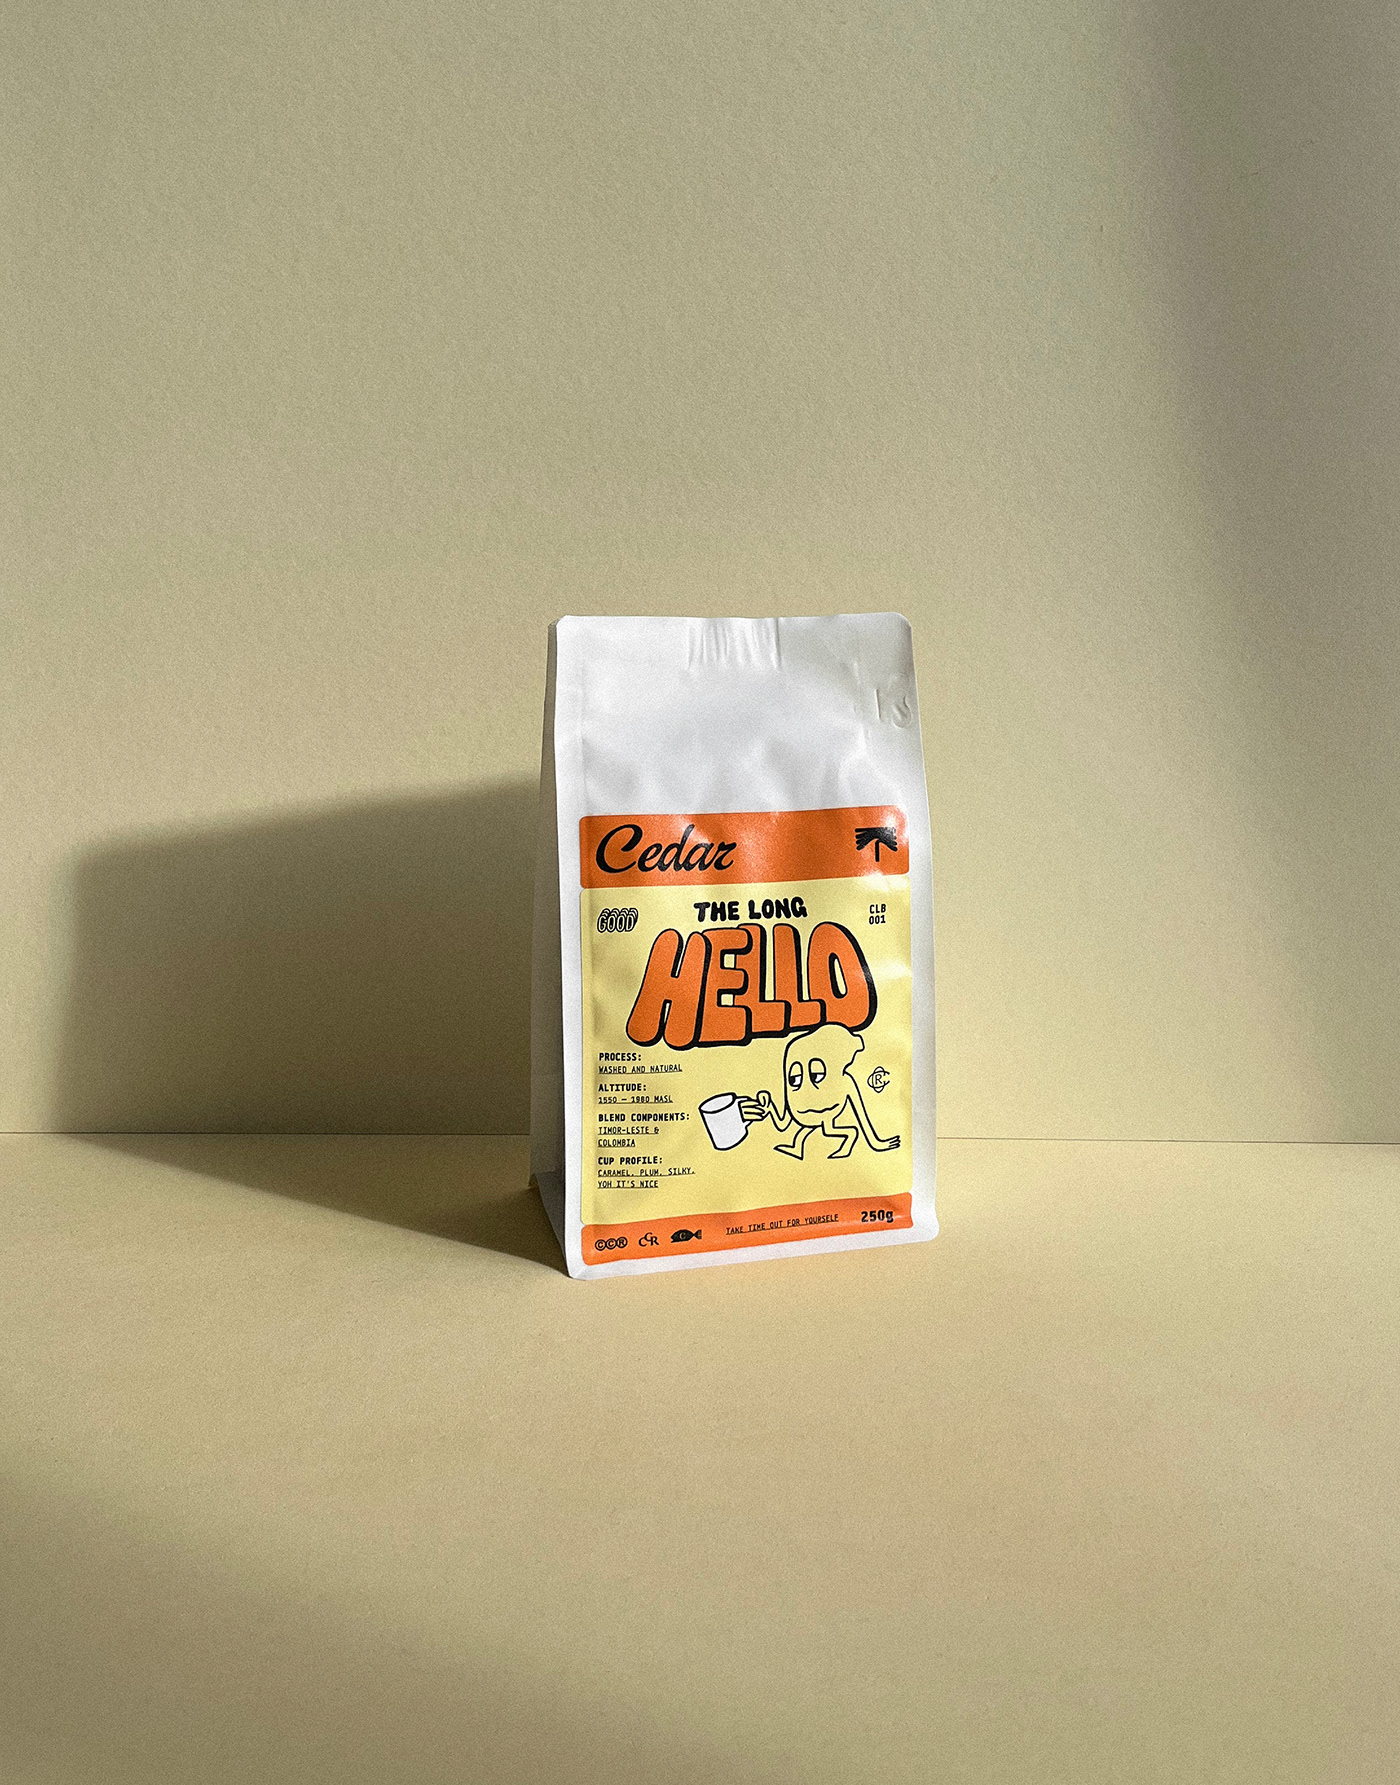 beans Coffee coffee shop Collaboration GOOD GOOD GOOD jar Label limited edition Packaging product